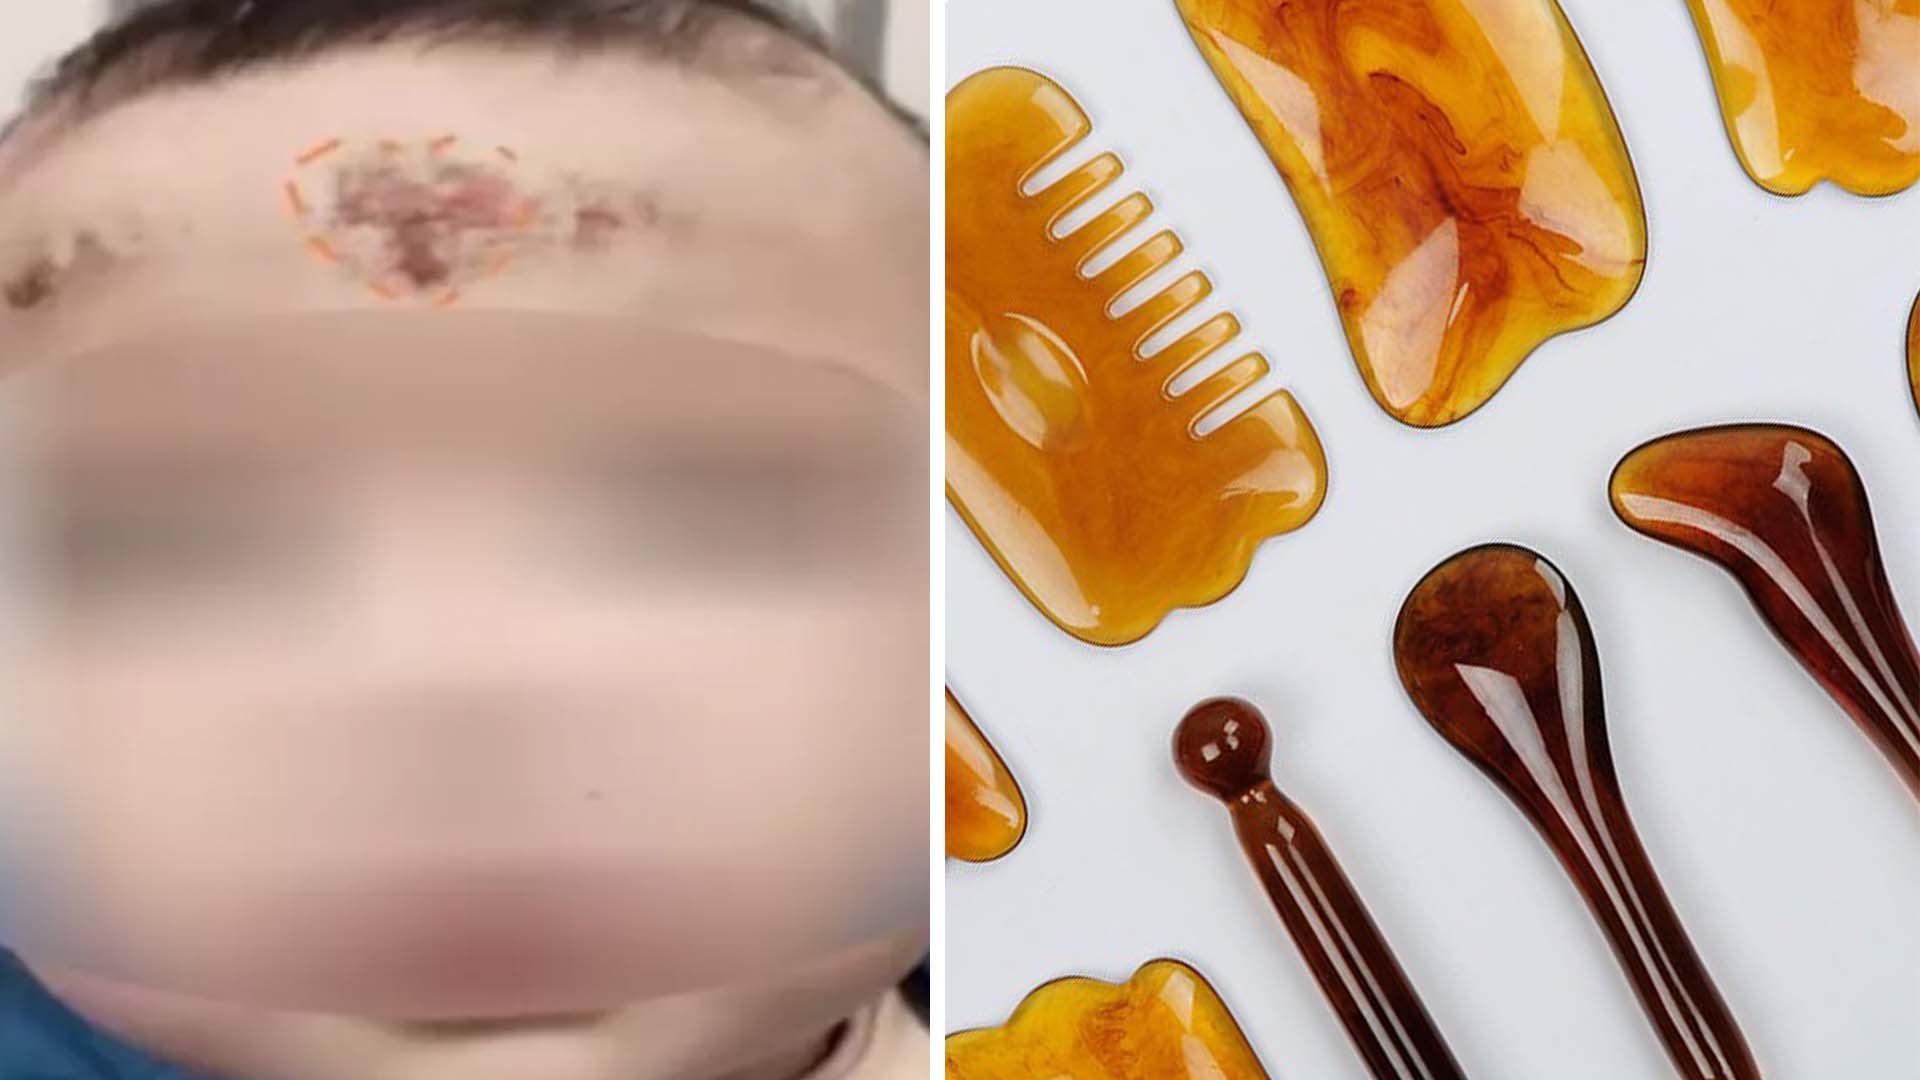 Traditional Chinese medicine treatment by grandma leaves baby girl in hospital  with serious injuries to her face | South China Morning Post